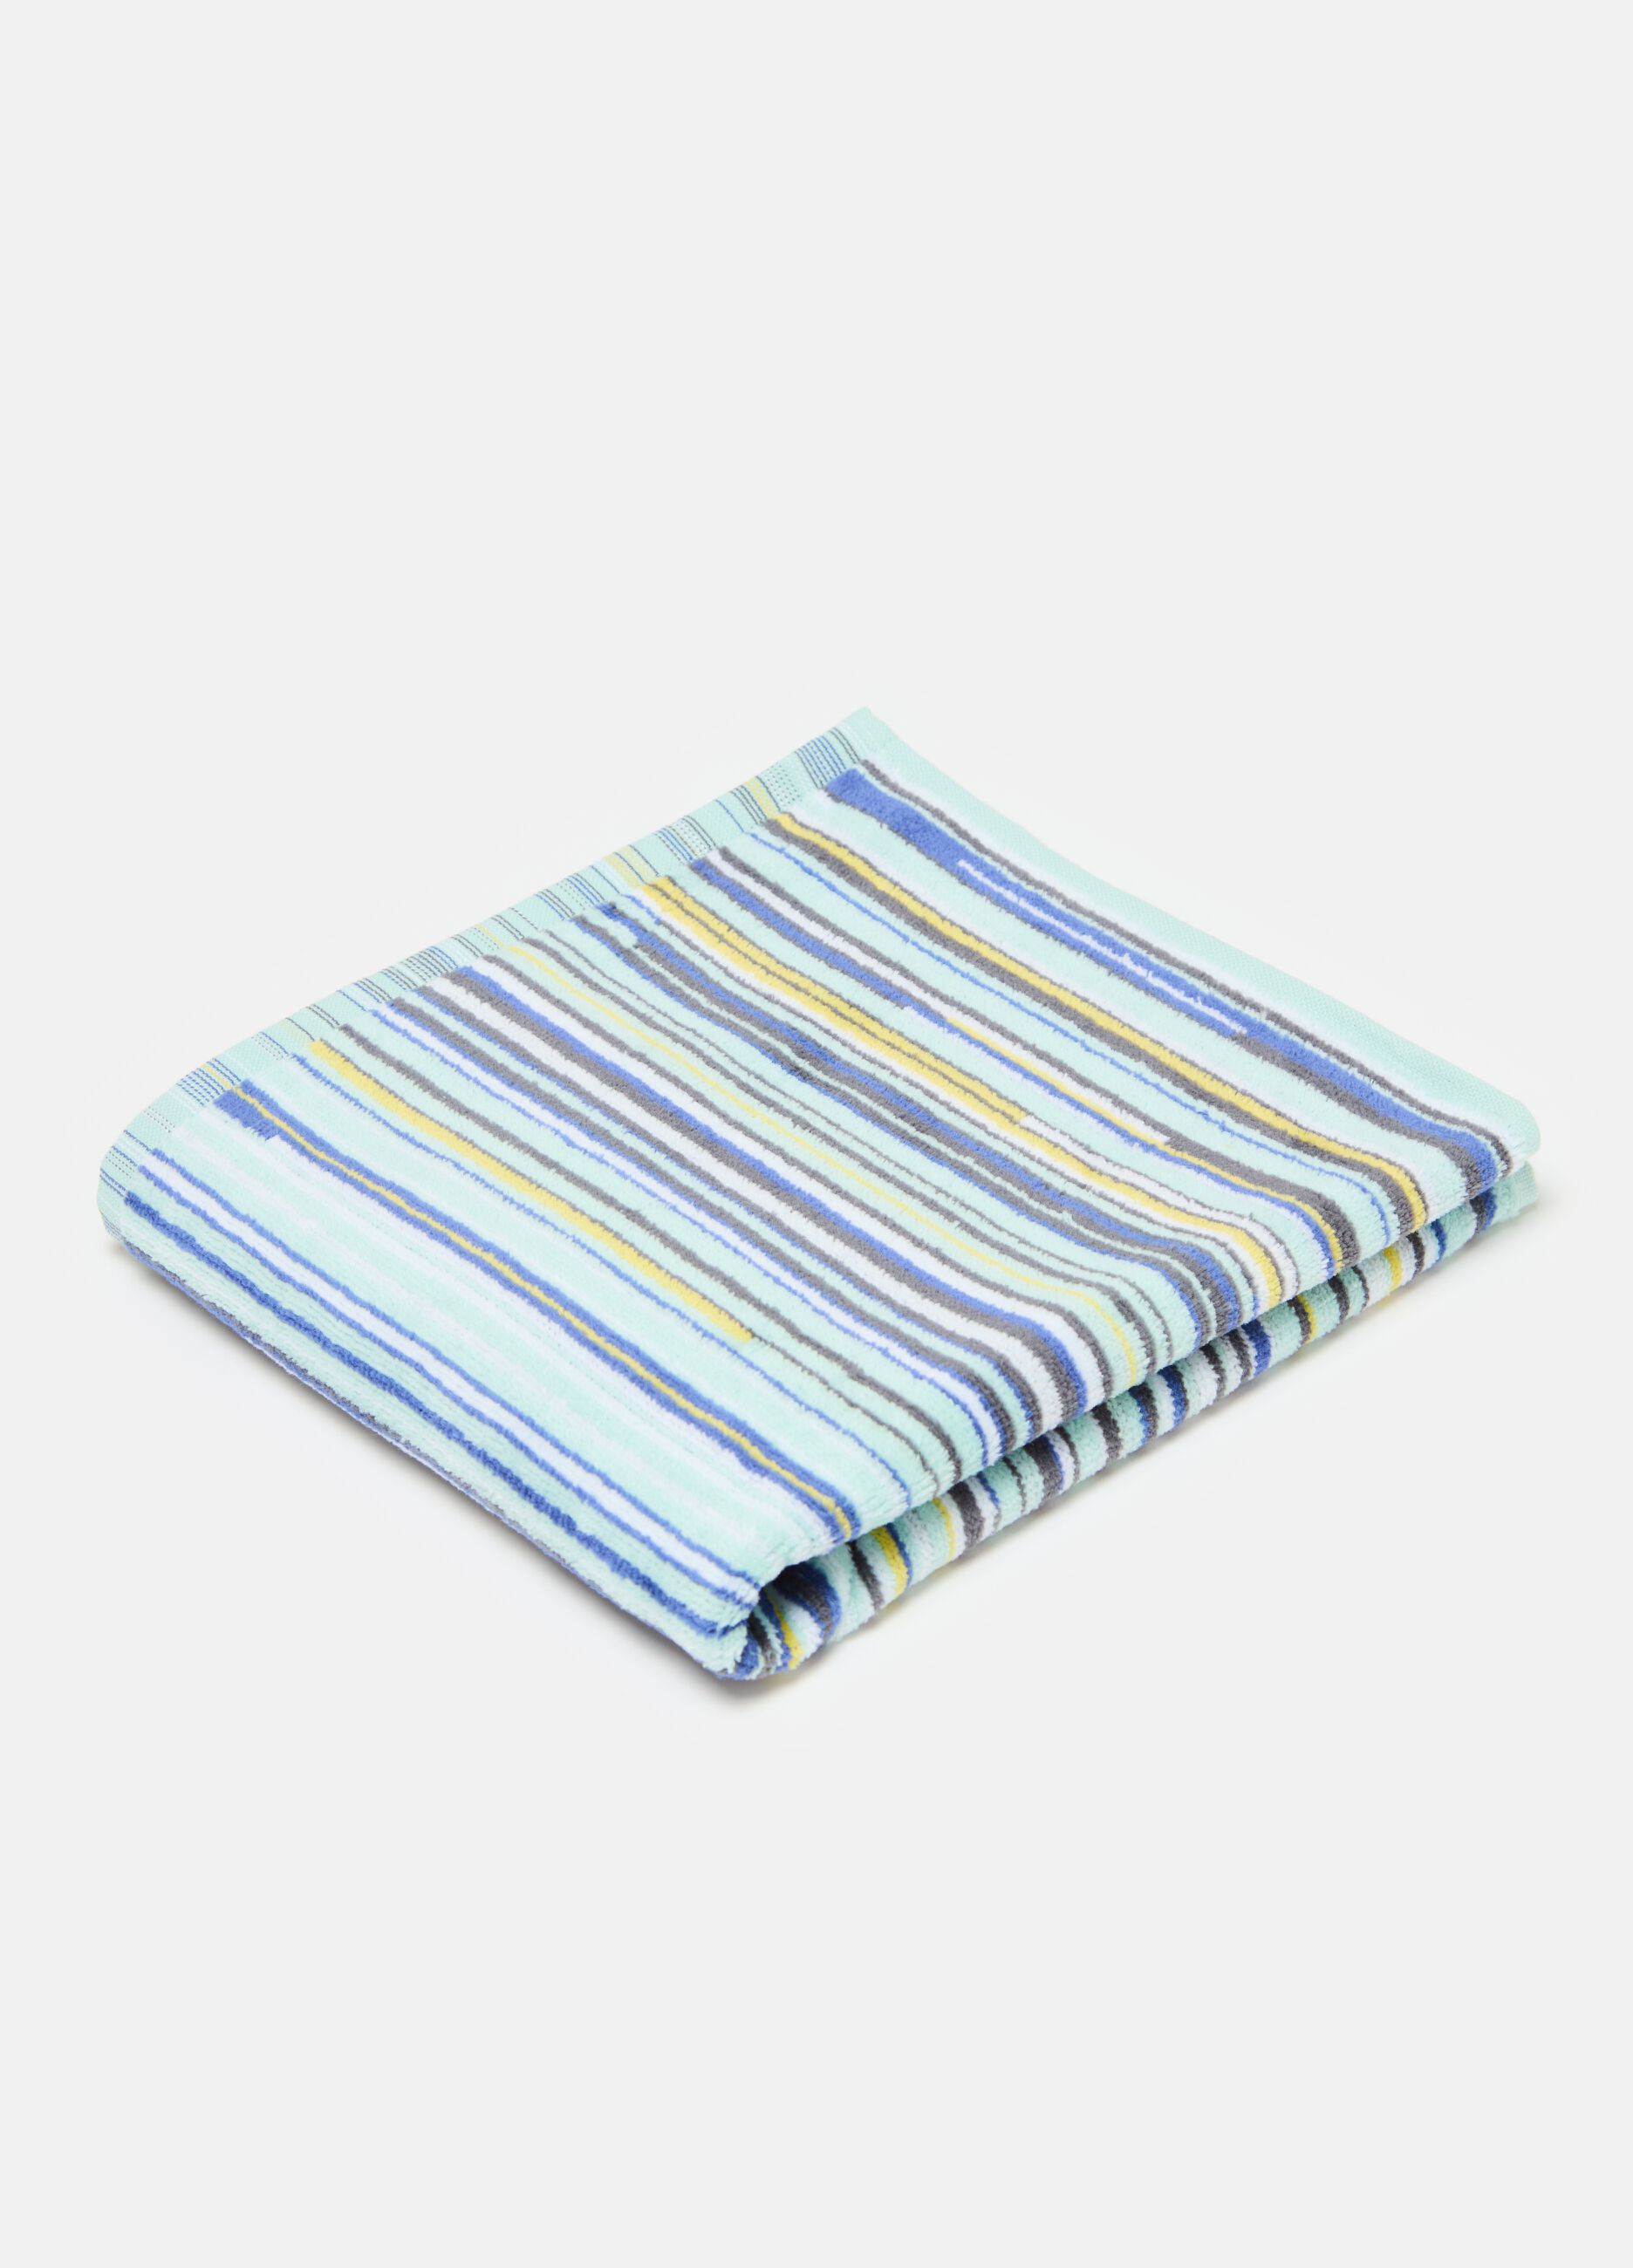 Face towel with striped pattern